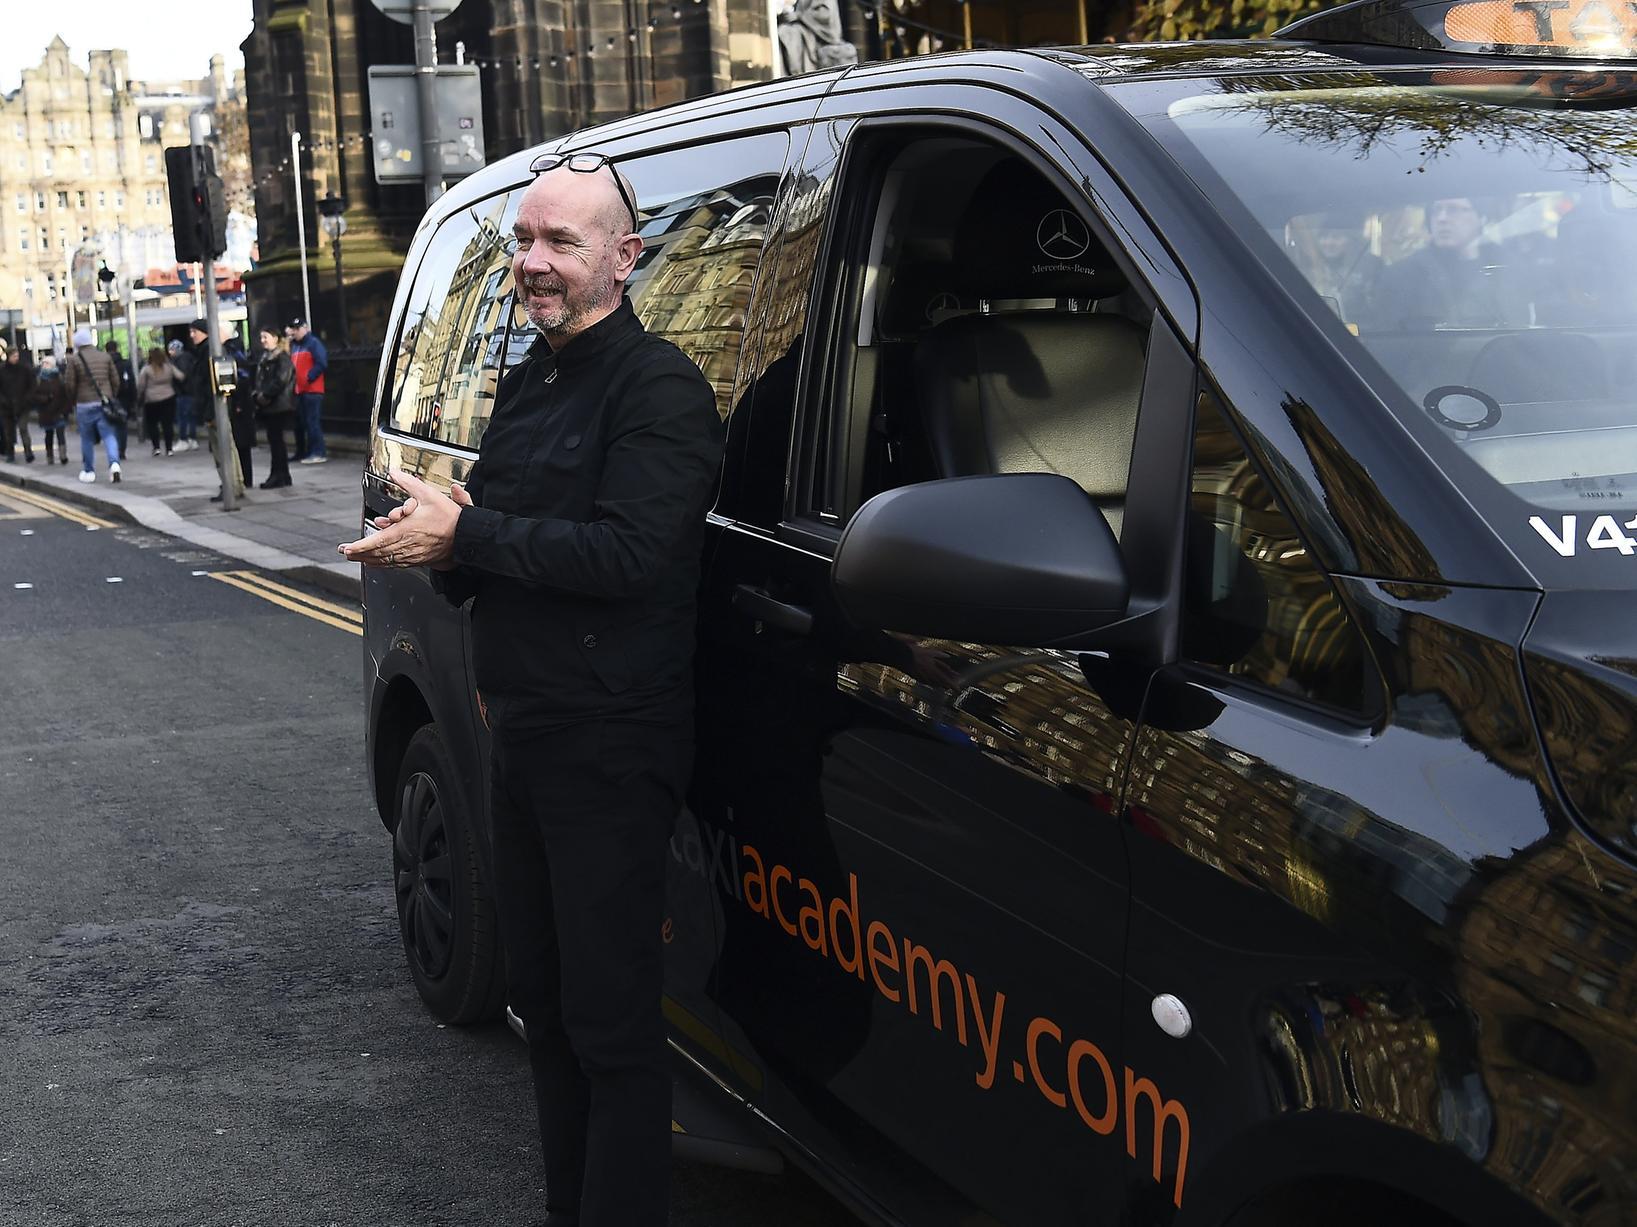 The streets were brought to a standstill, with many applauding the life of Tom Gilzean.